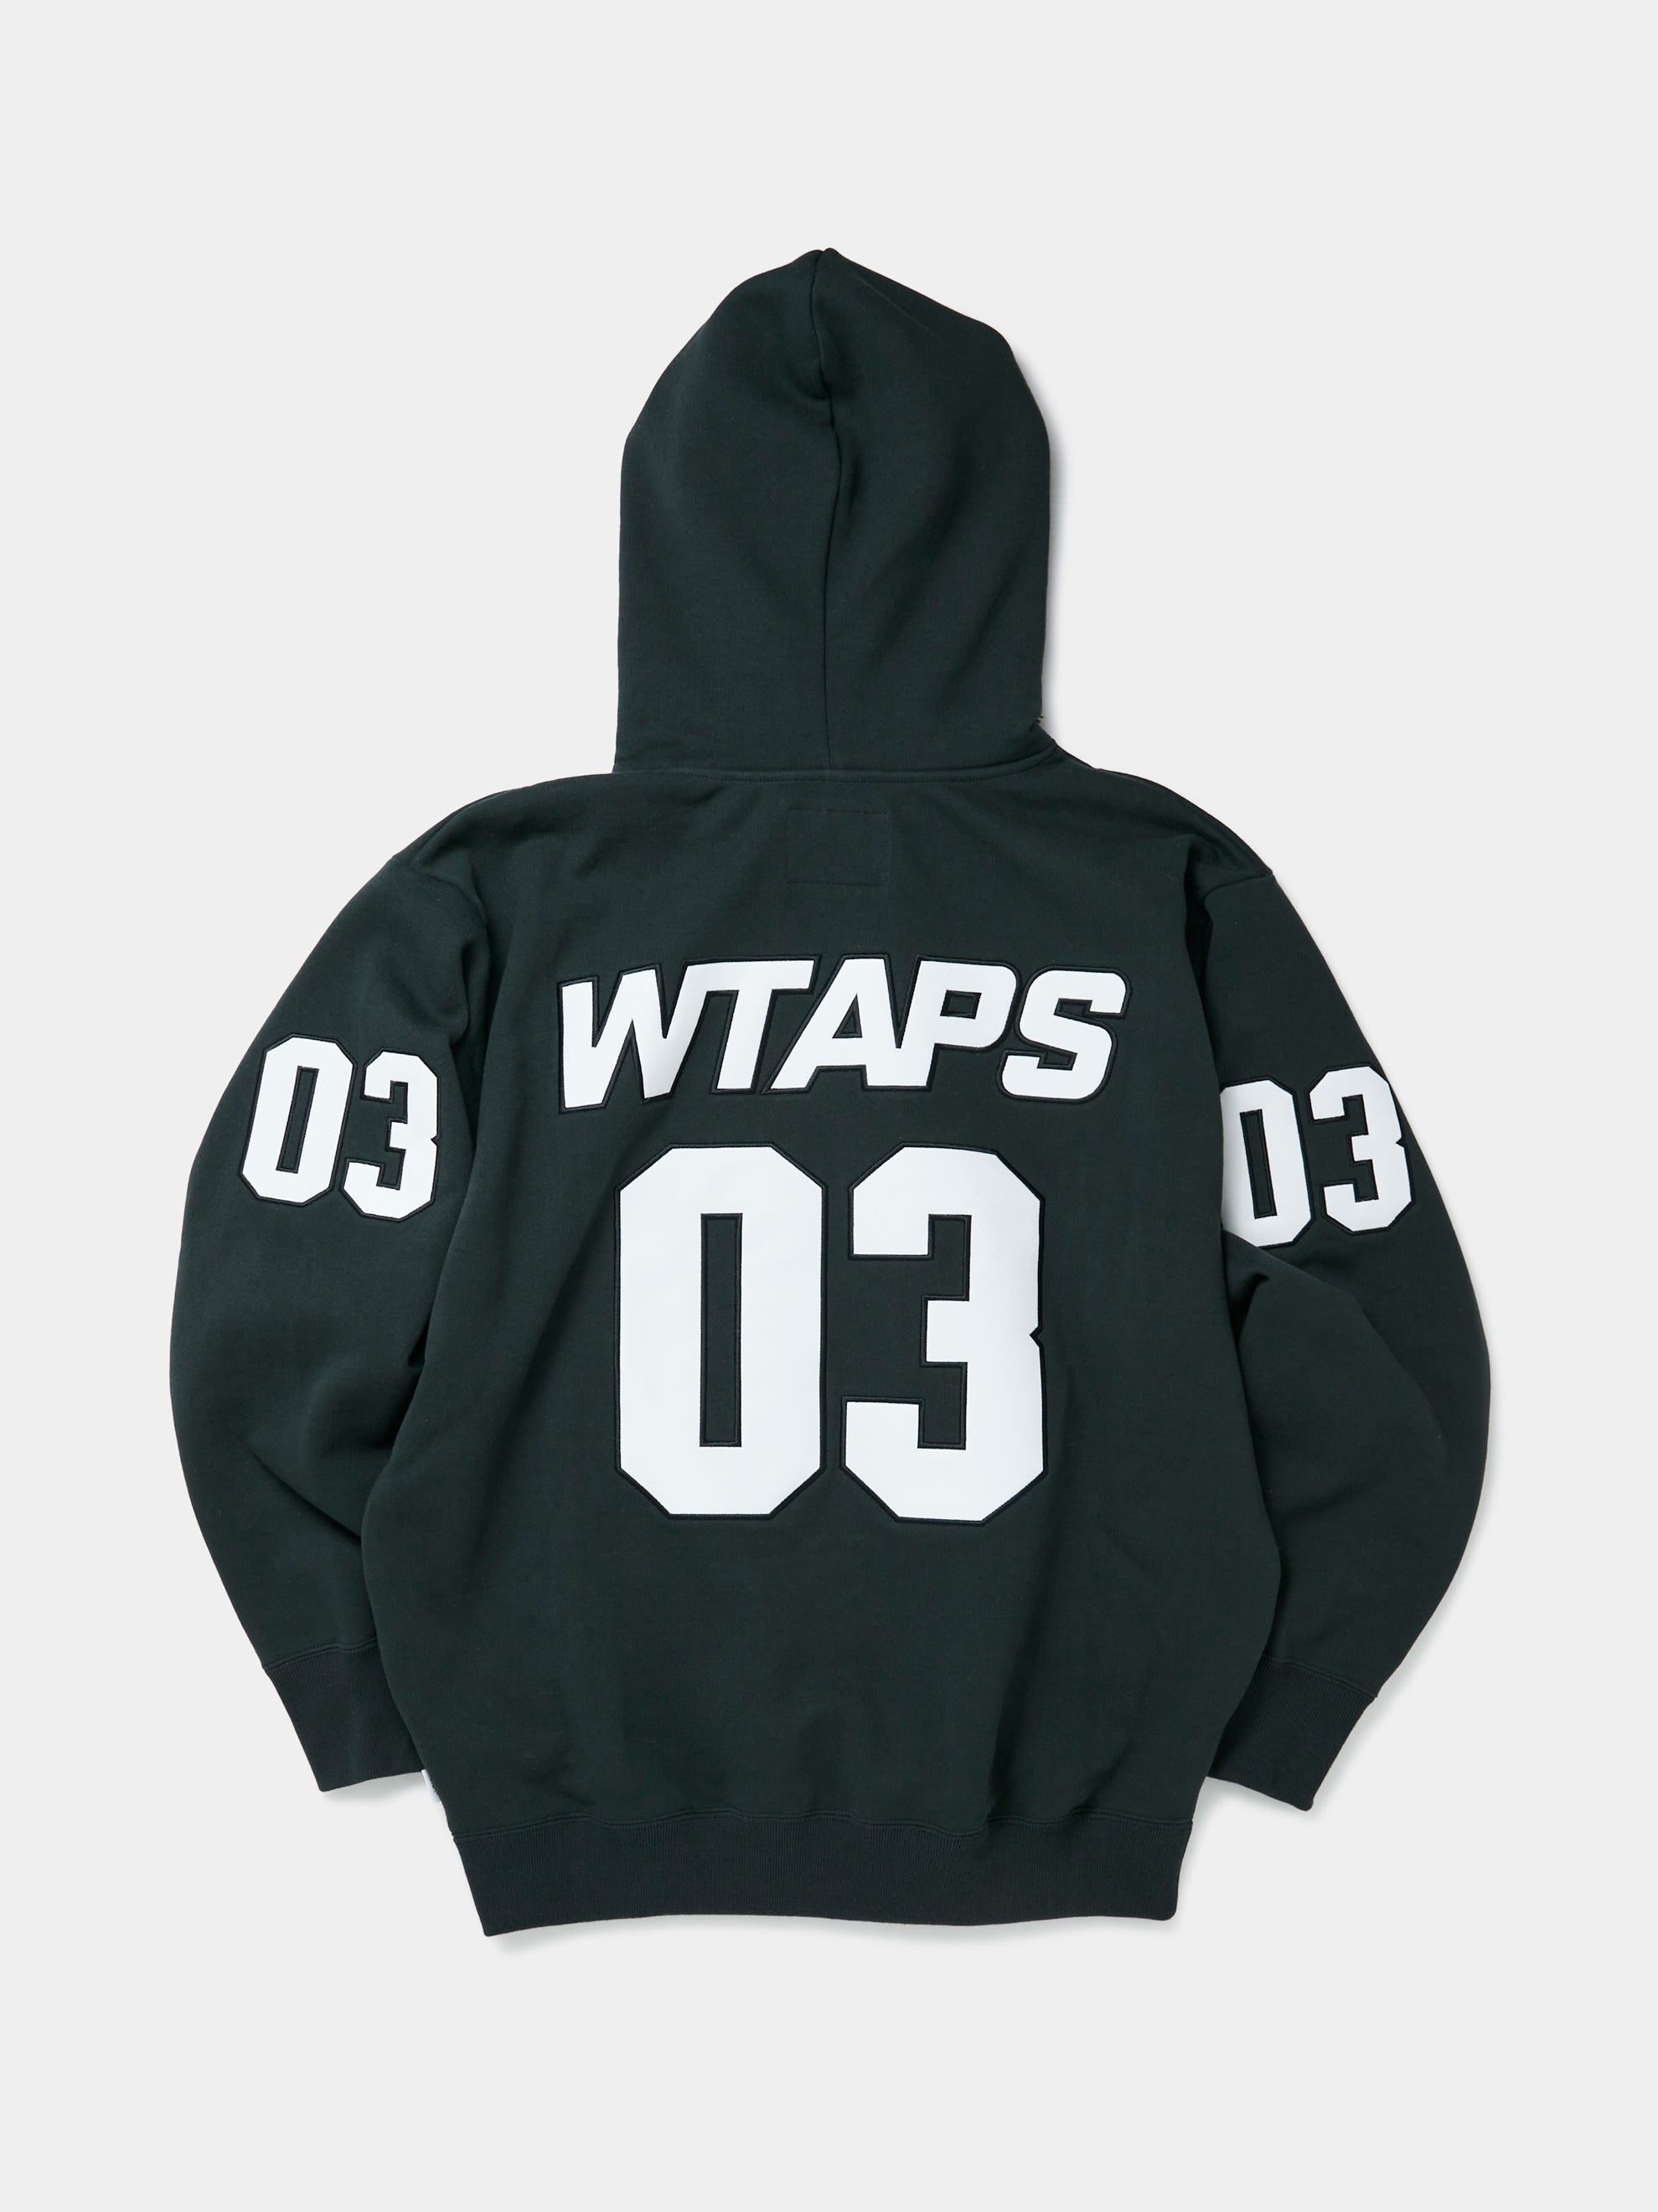 Buy Wtaps OBJ 02 / HOODY / COTTON. PROTECT (Black) Online at UNION